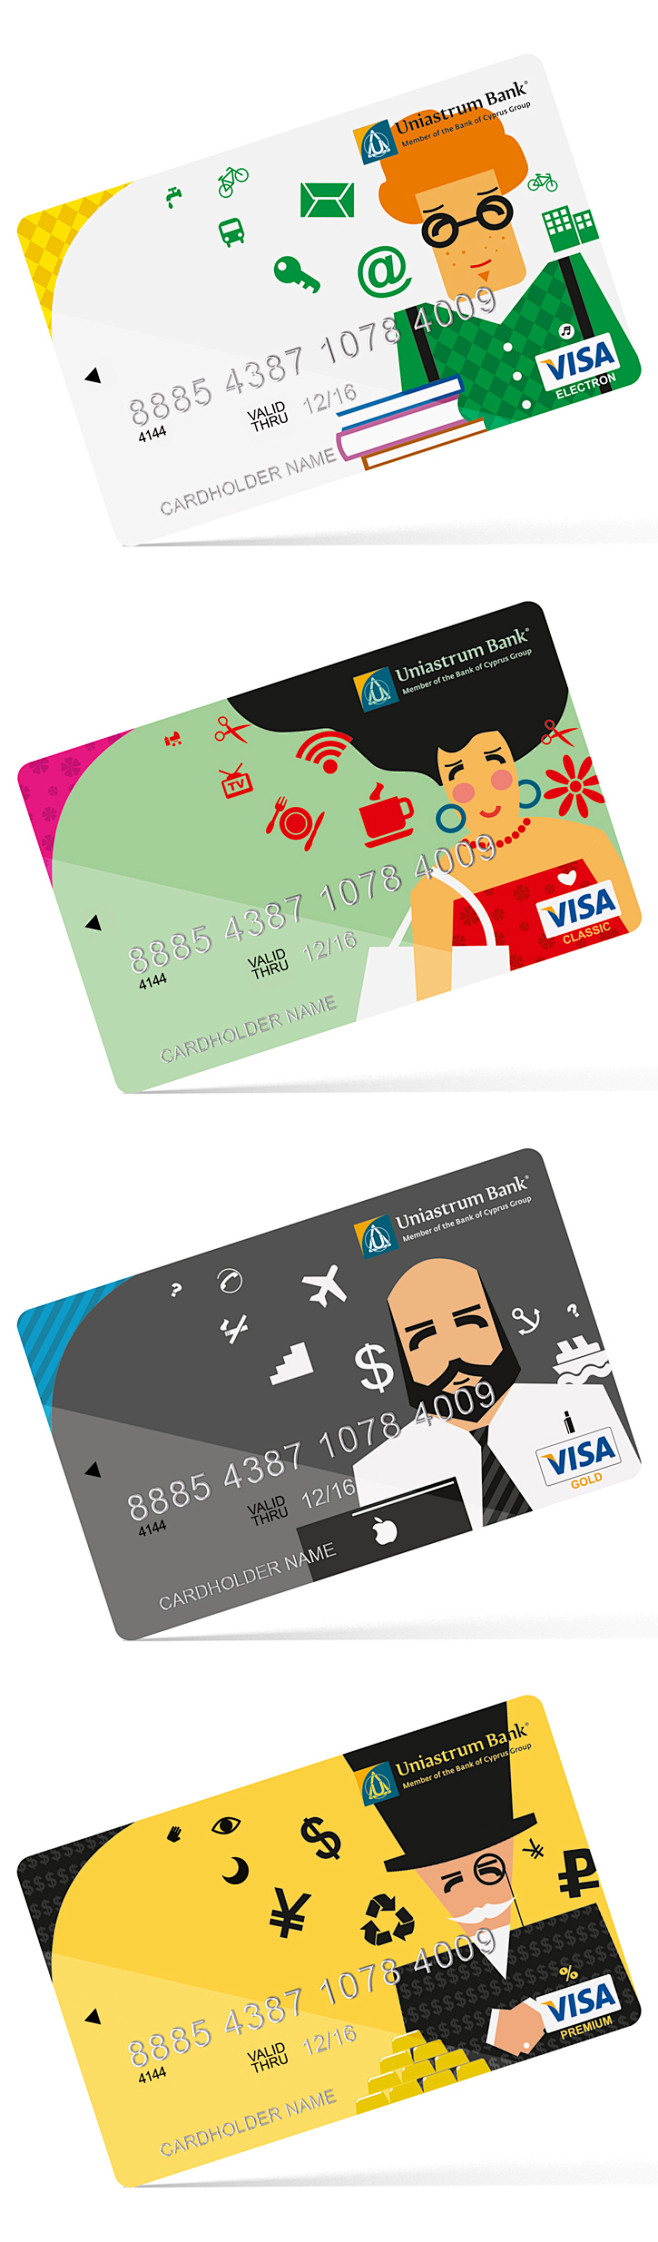 CREDIT CARDS OF "UNI...